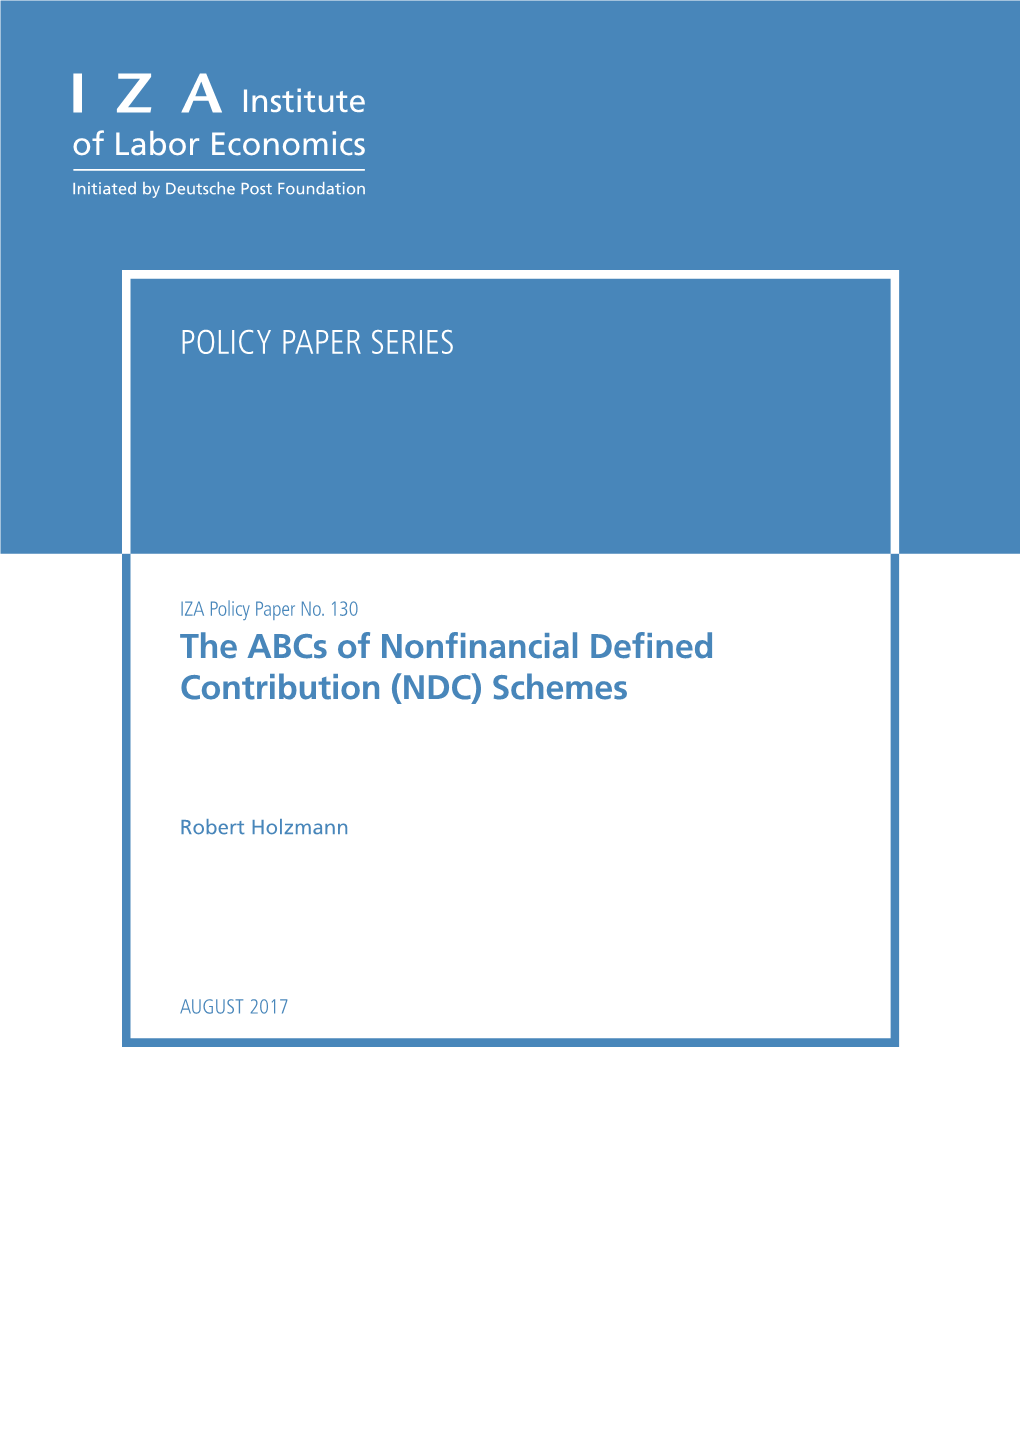 The Abcs of Nonfinancial Defined Contribution (NDC) Schemes